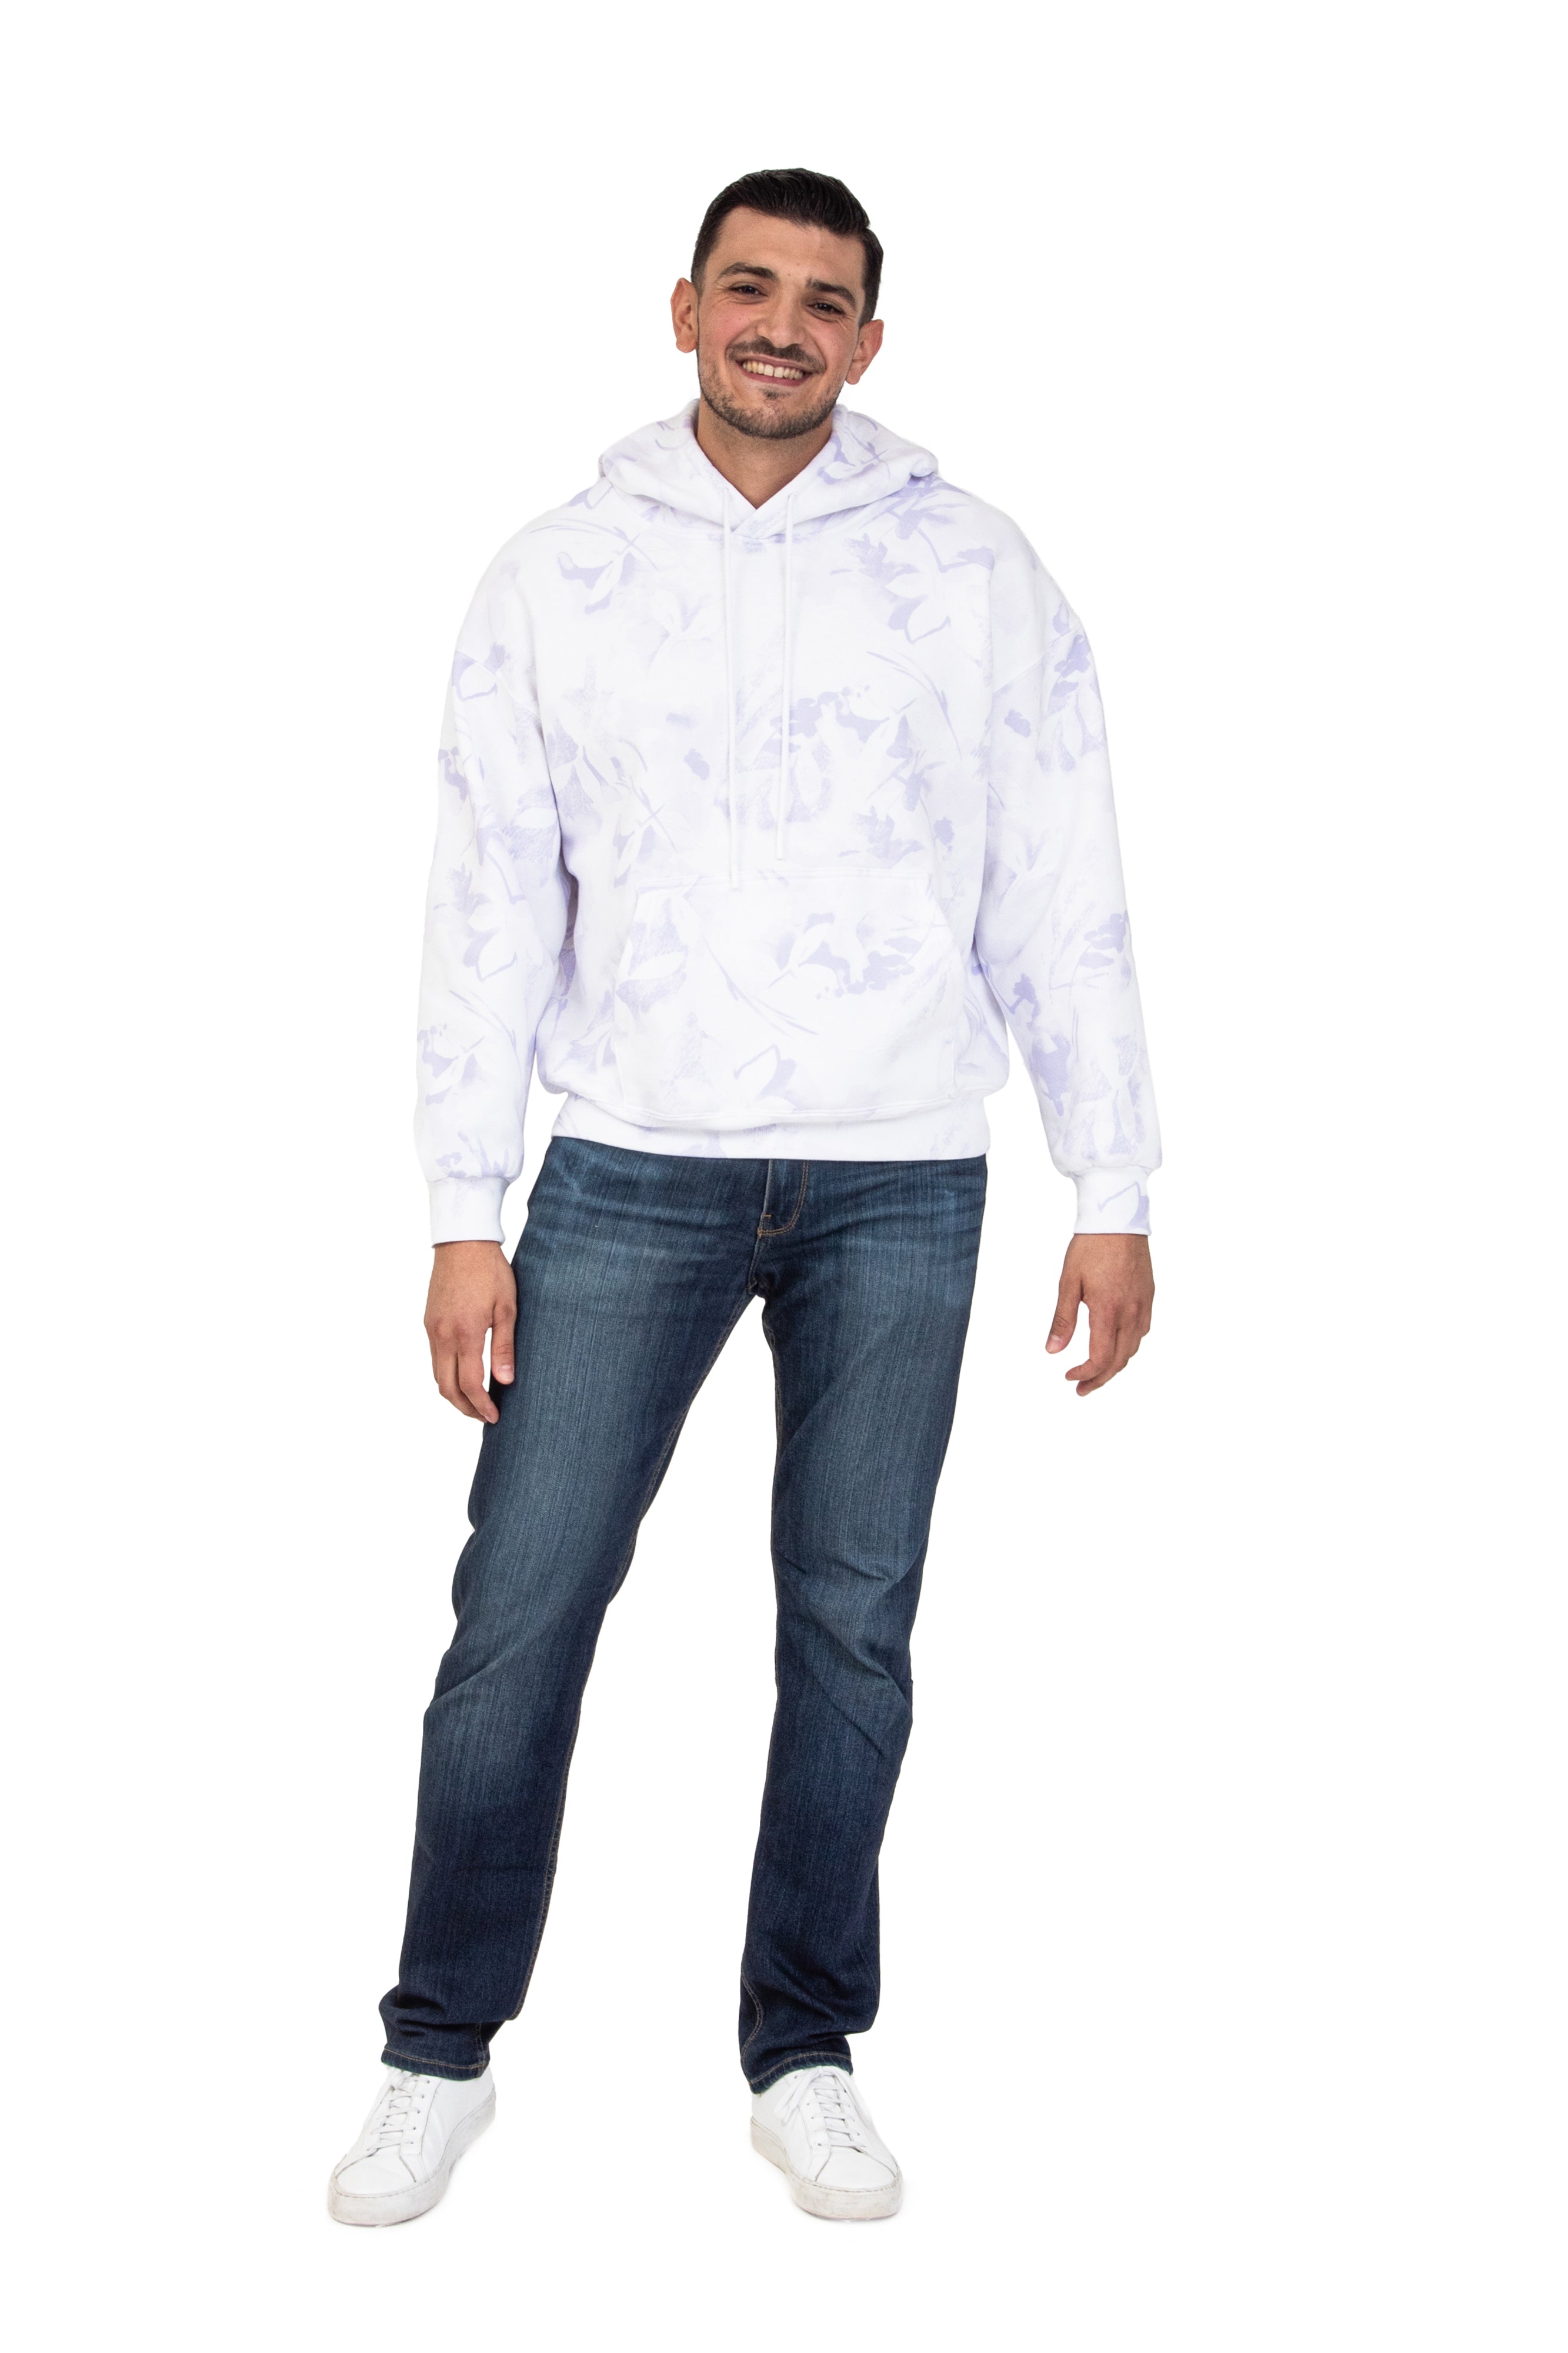 Men's Relaxed Fit Hoodie in Lavender Floral print